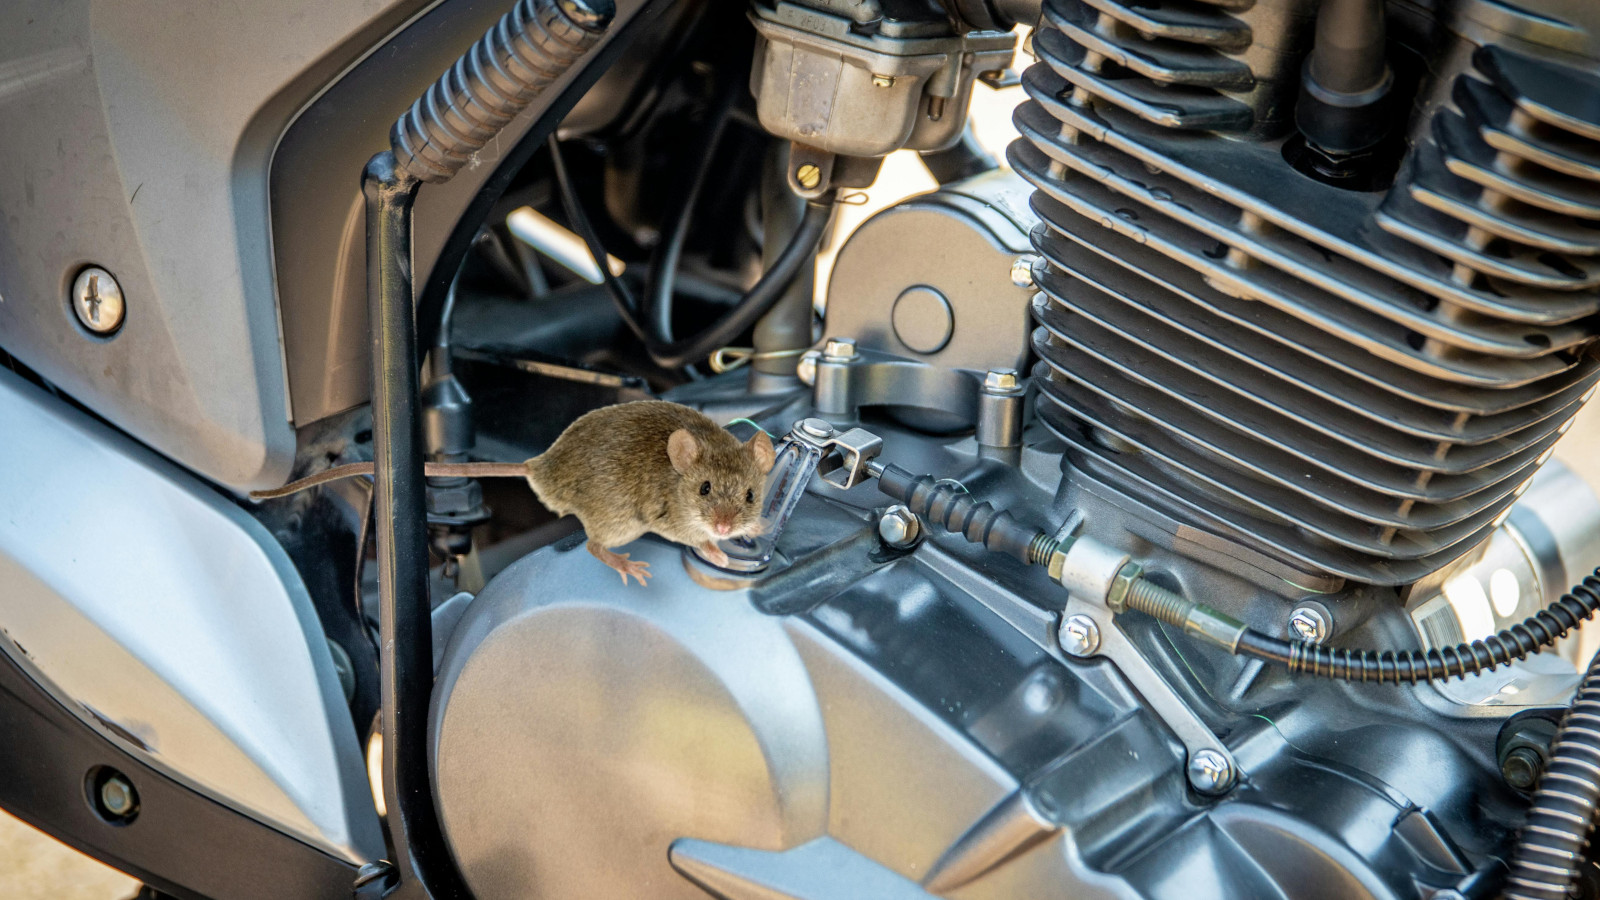 How to safeguard your motorcycle from Mice